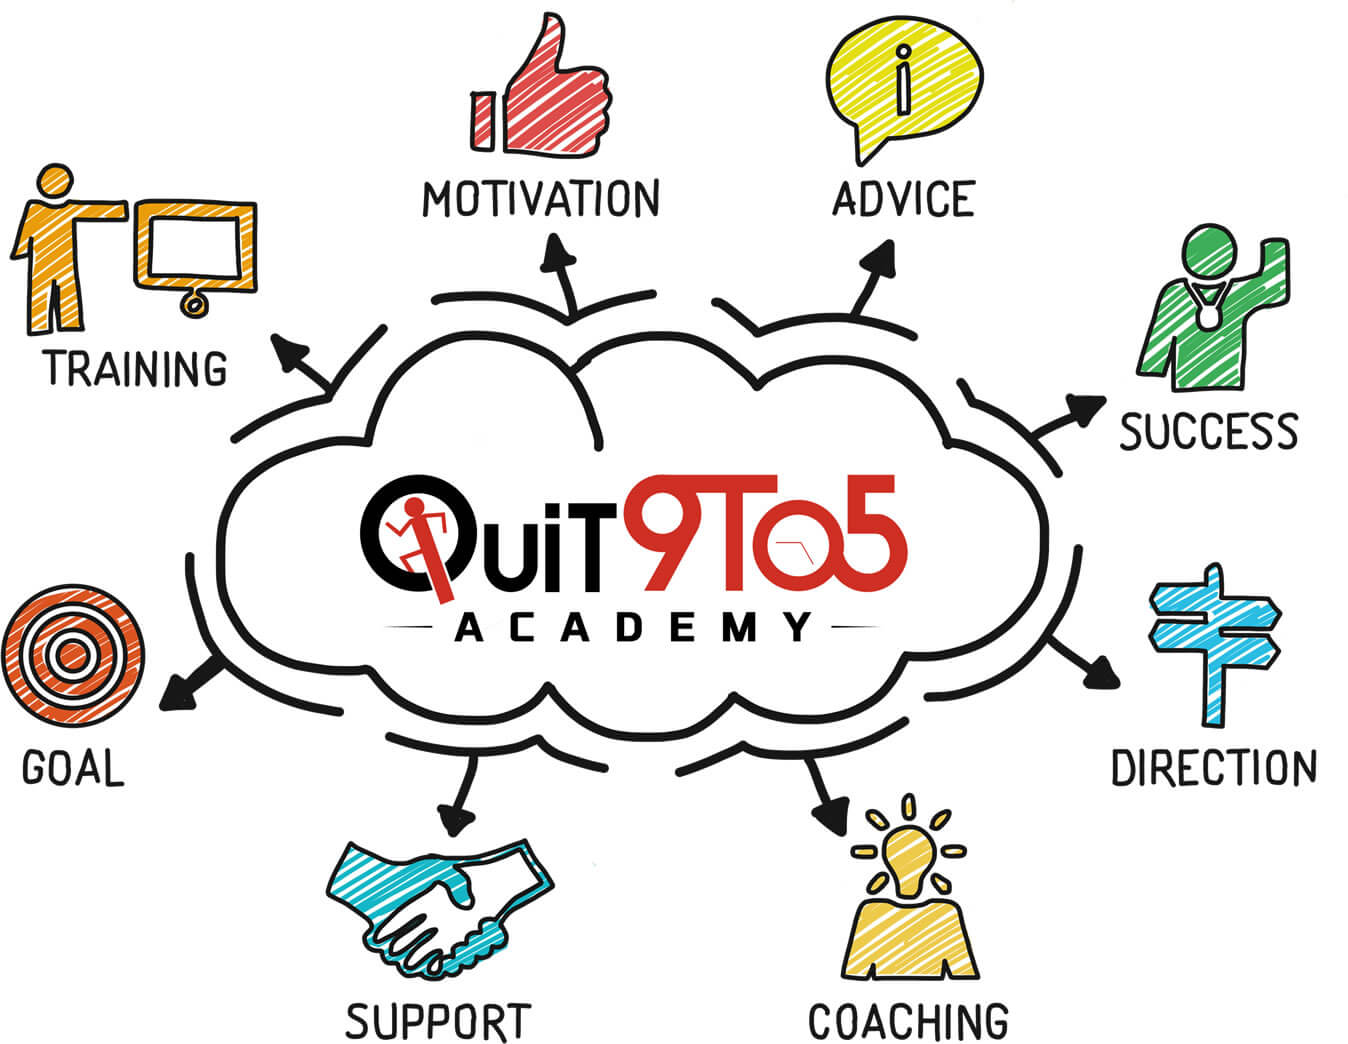 What Will You Find In The Quit 9 To 5 Academy Course